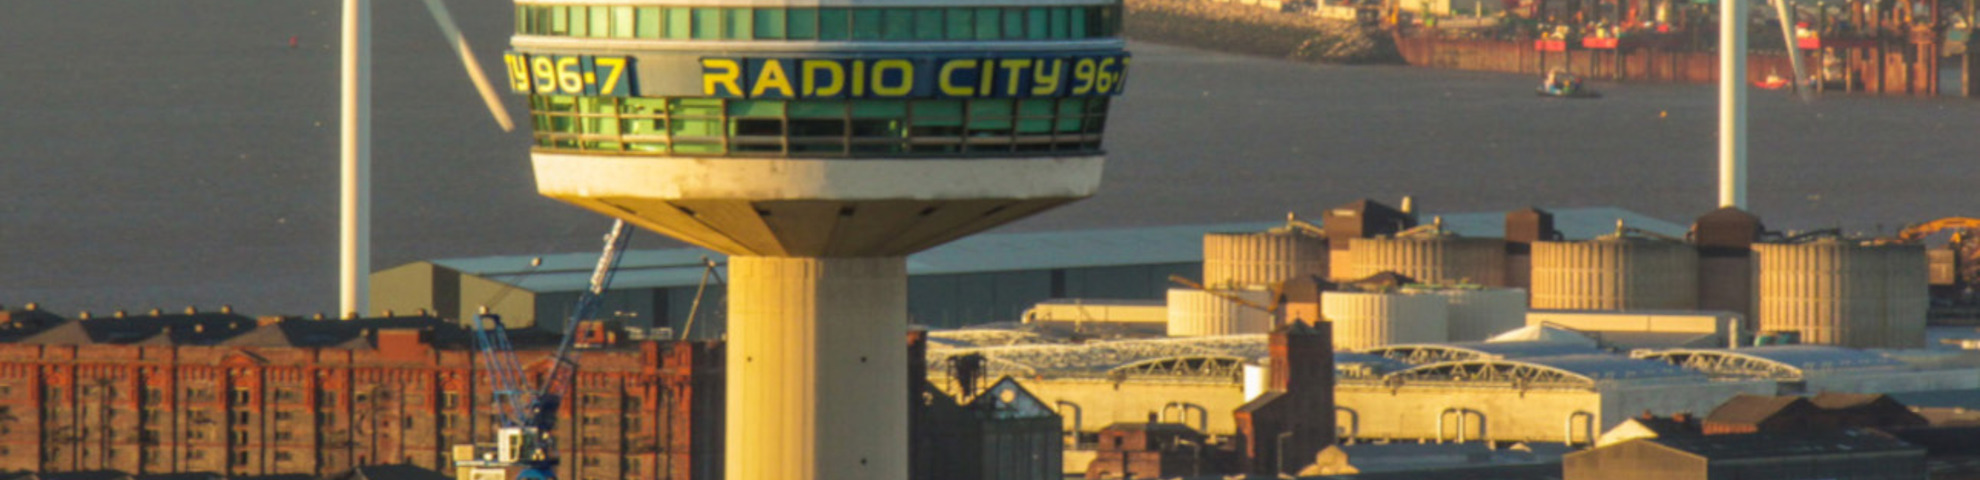 The top of the radio city tower at sunset. Buildings are in the background.